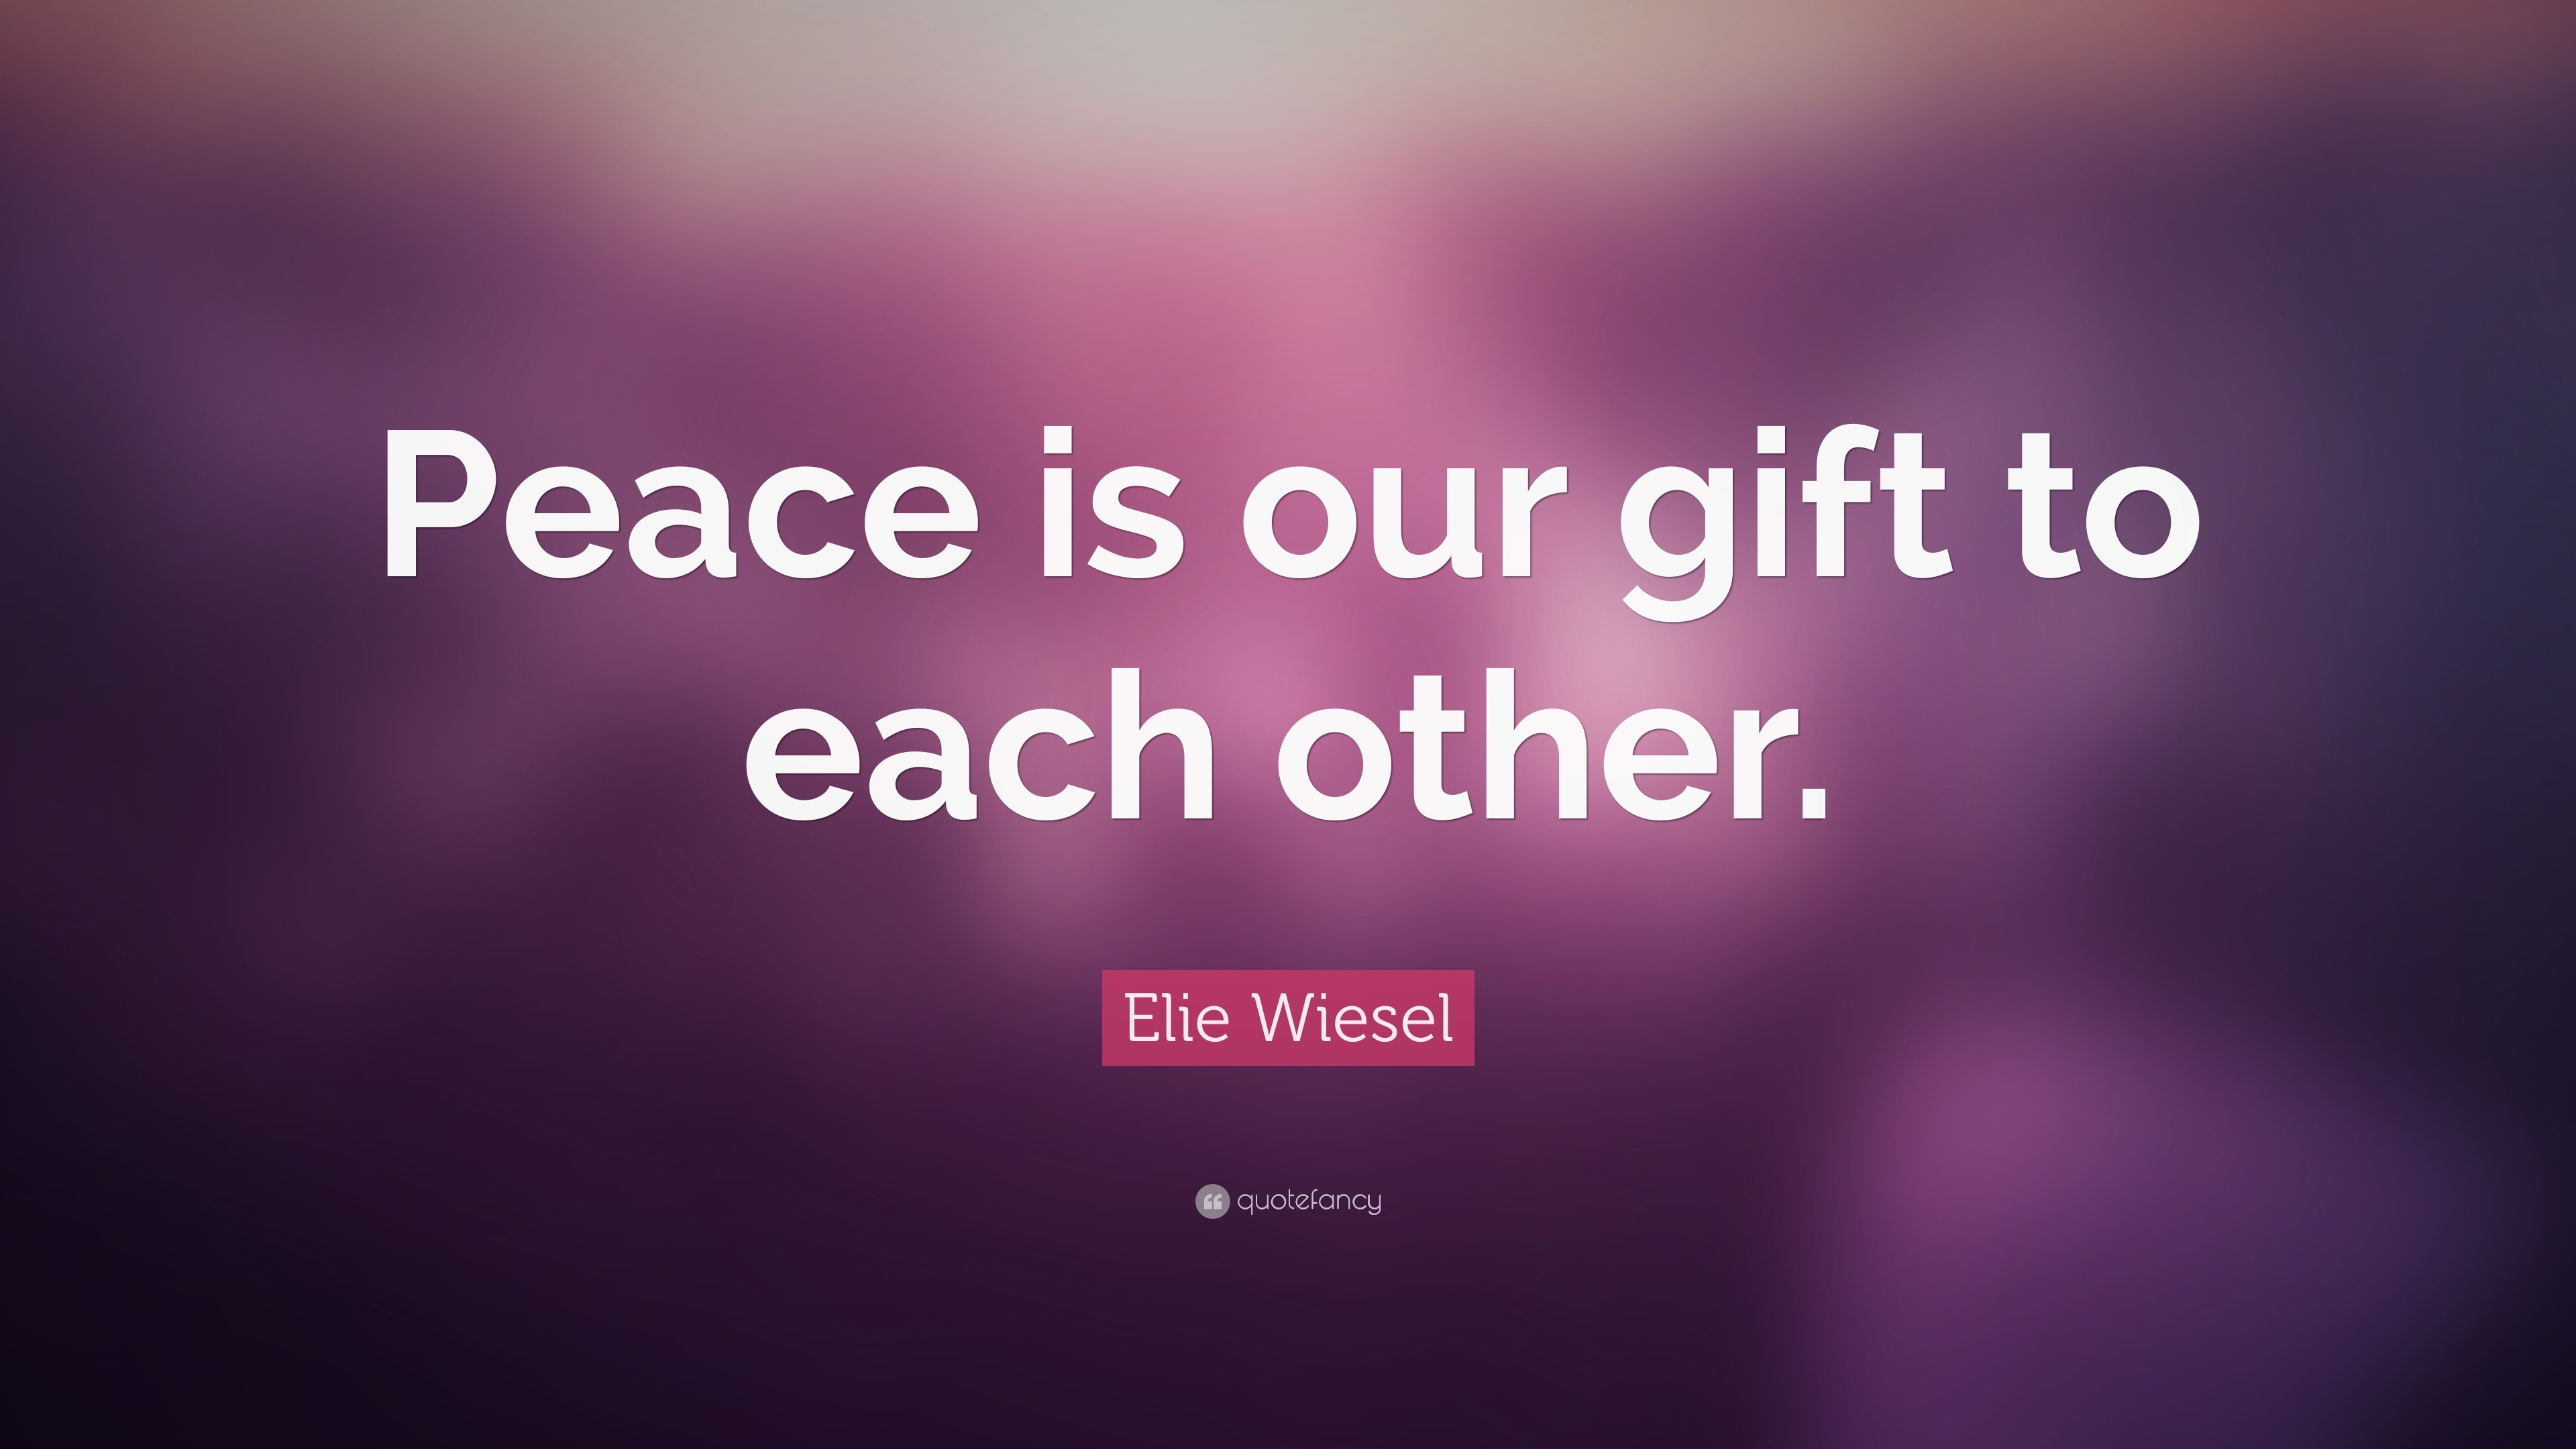 59482-Elie-Wiesel-Quote-Peace-is-our-gift-to-each-other.jpg